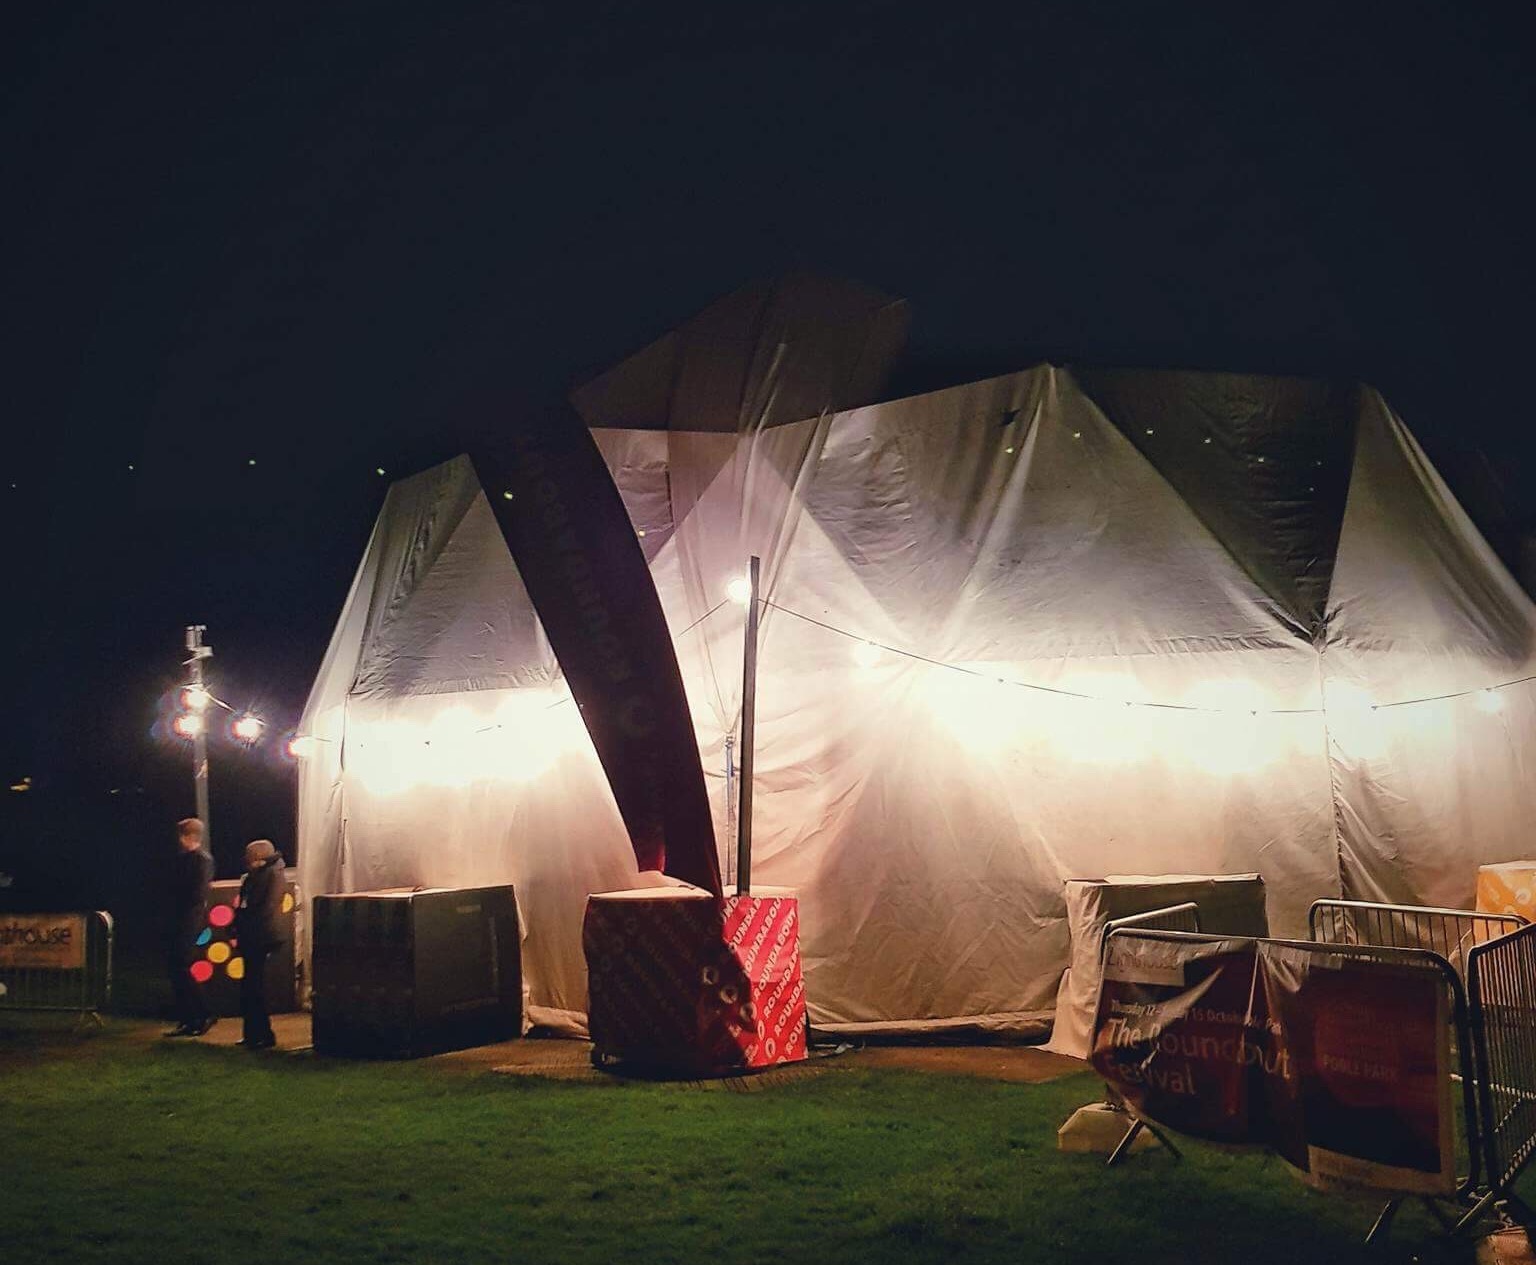 Roundabout Tent